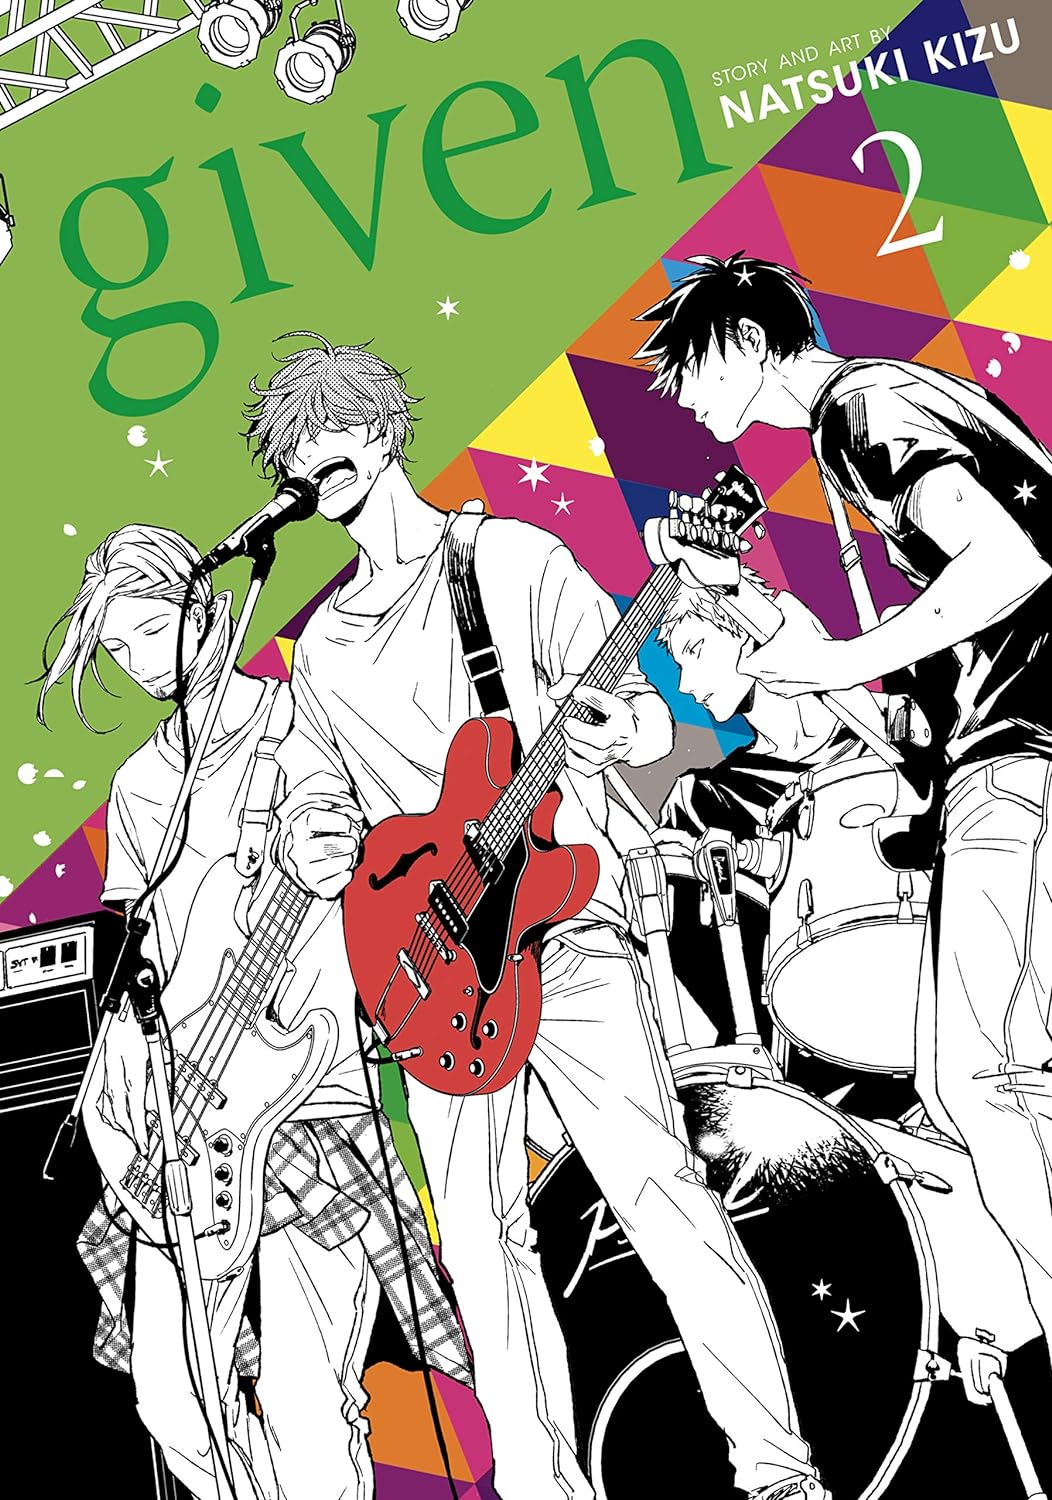 The book cover for Given Volume 2 shows four Japanese men passionately performing music on a stage.